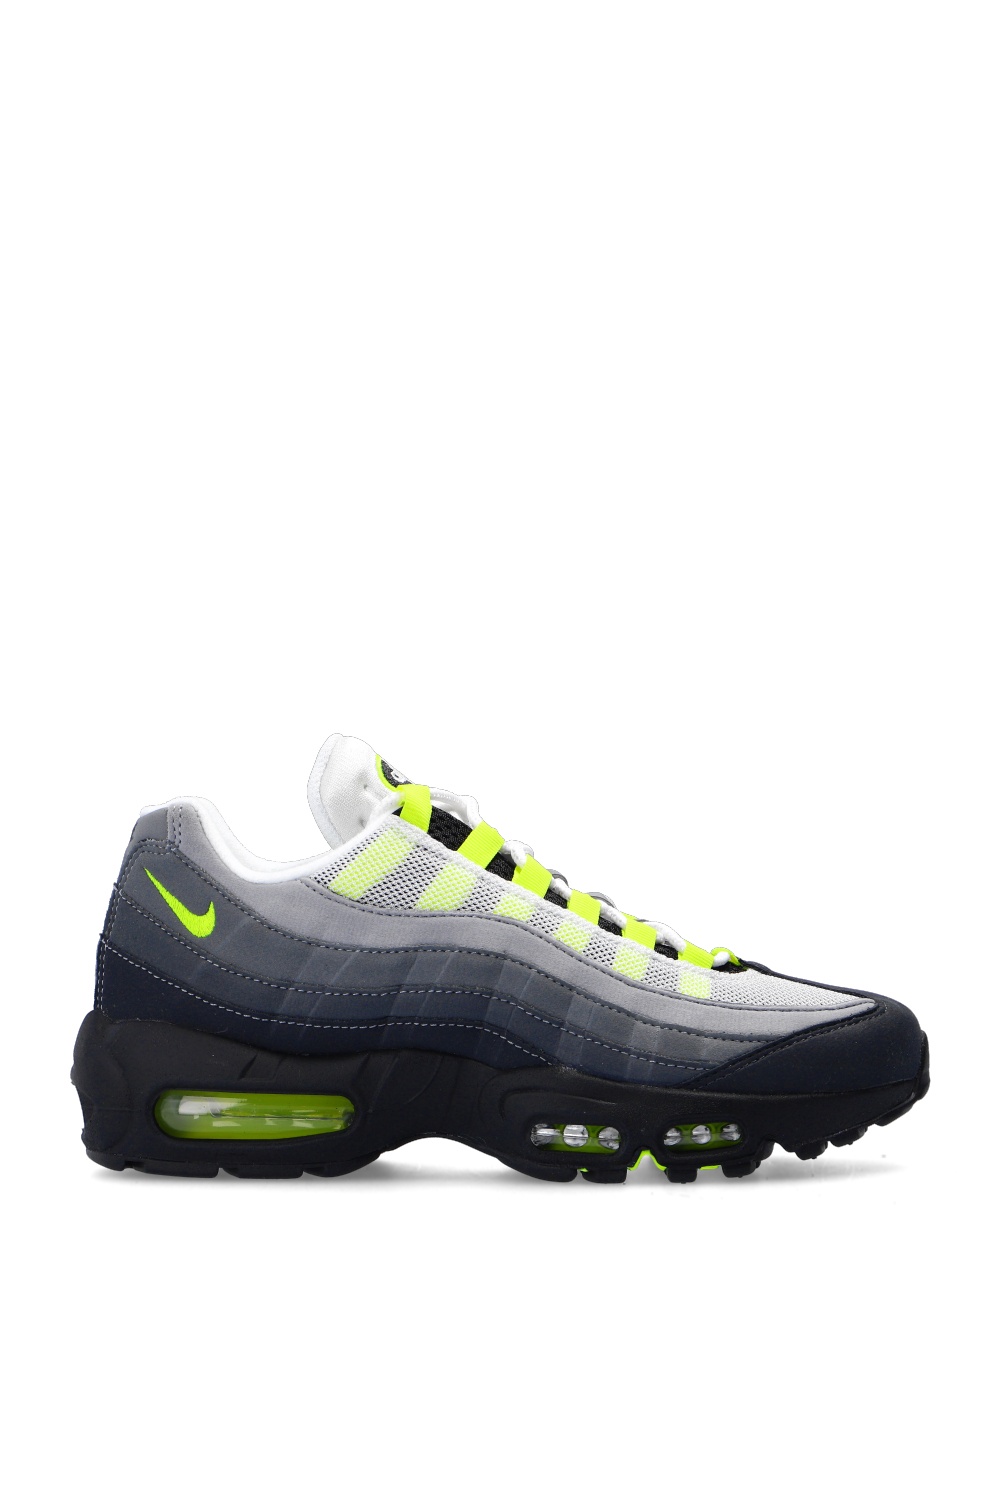 Acheter Nike Air Max 95 Chaussures et nouvelles sneakers - StockX